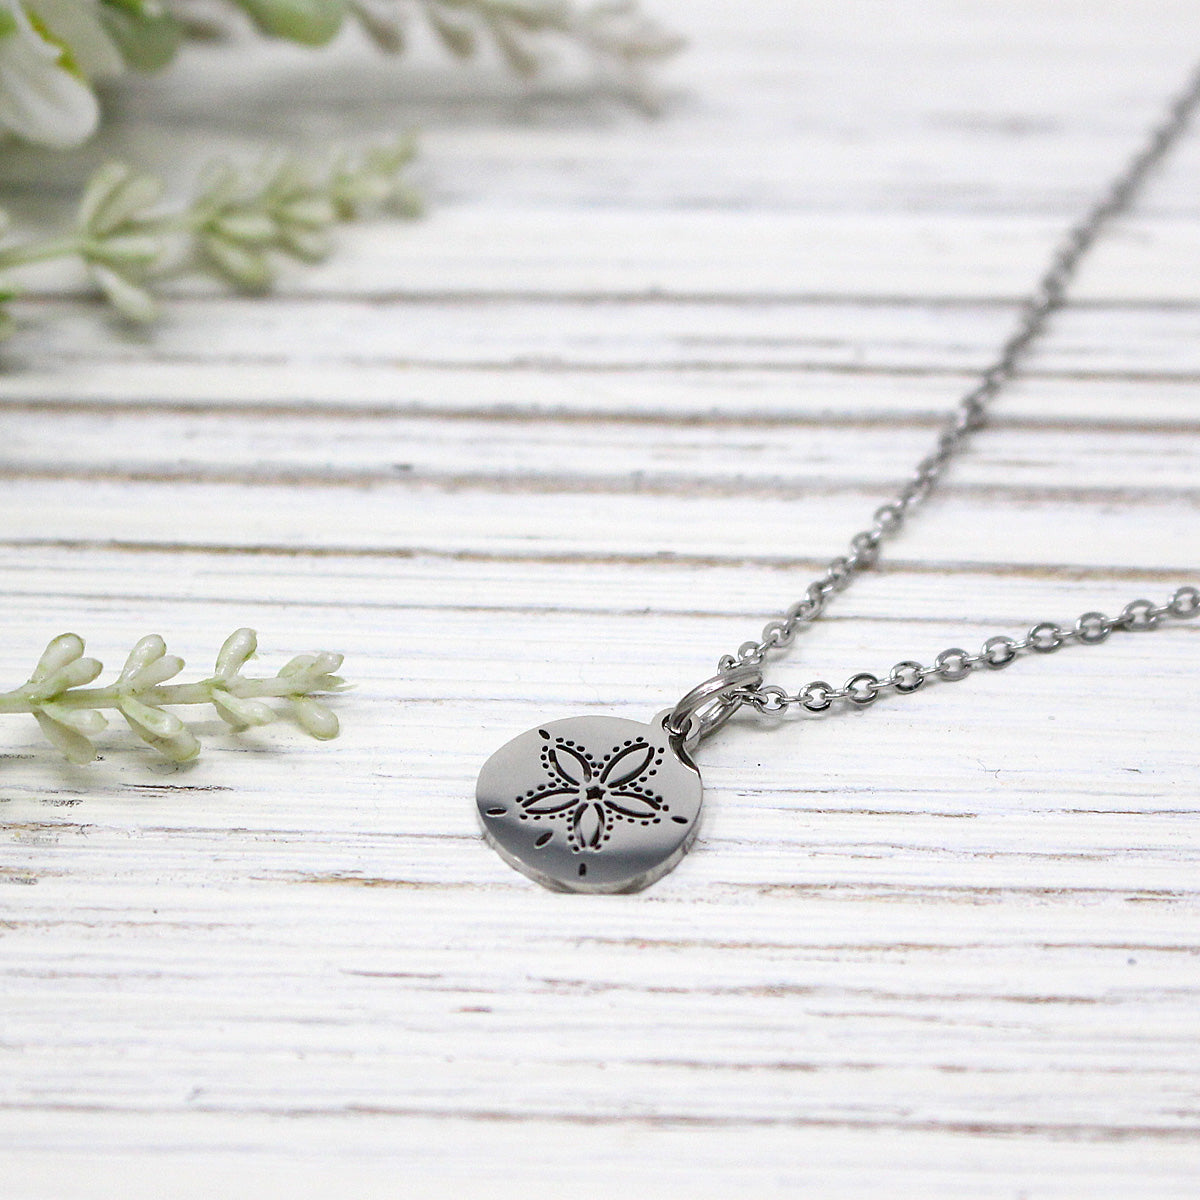 Mini Sand Dollar Necklace, Stainless Steel